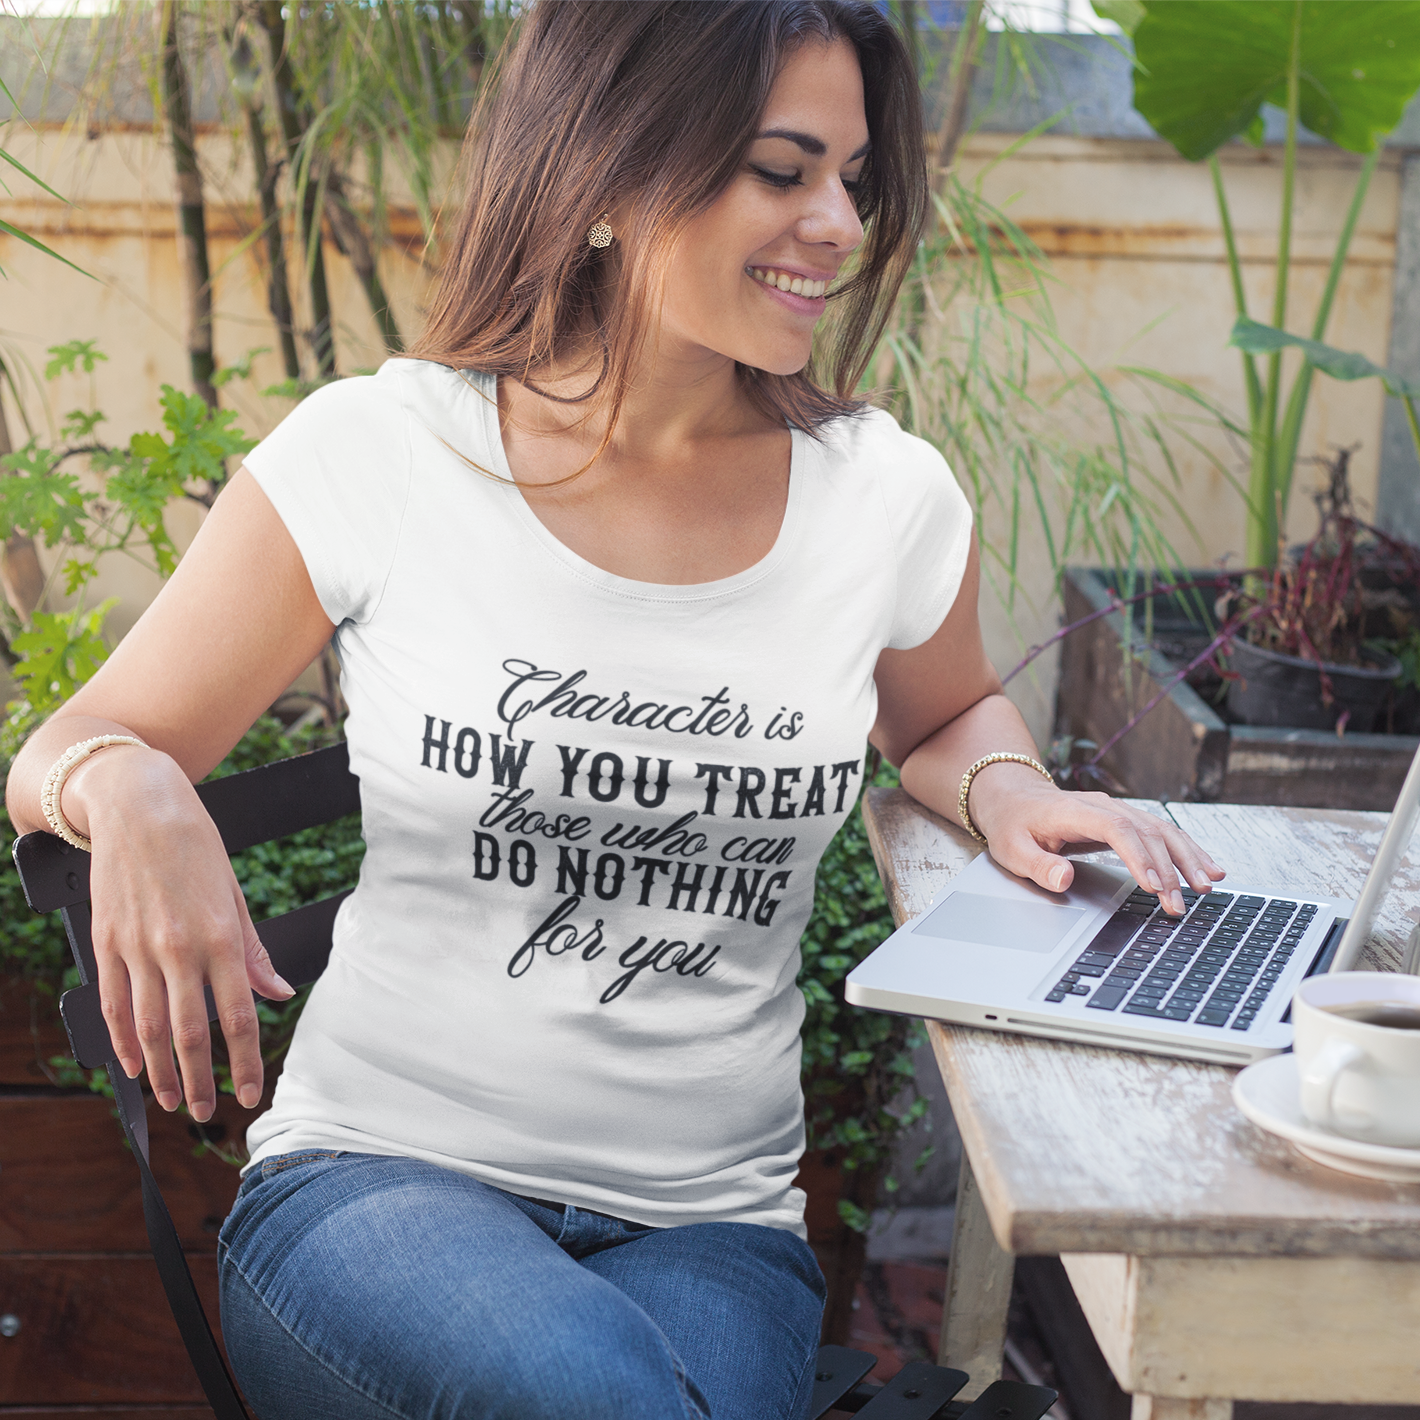 Story of Awakening Lifestyle Community Spirituality Relationships Love Light Meditation Oneness Earth Balance Healing Shop Store Charity Tree Nature Read Write Character Quote T shirt Tops Tees Clothing Women White